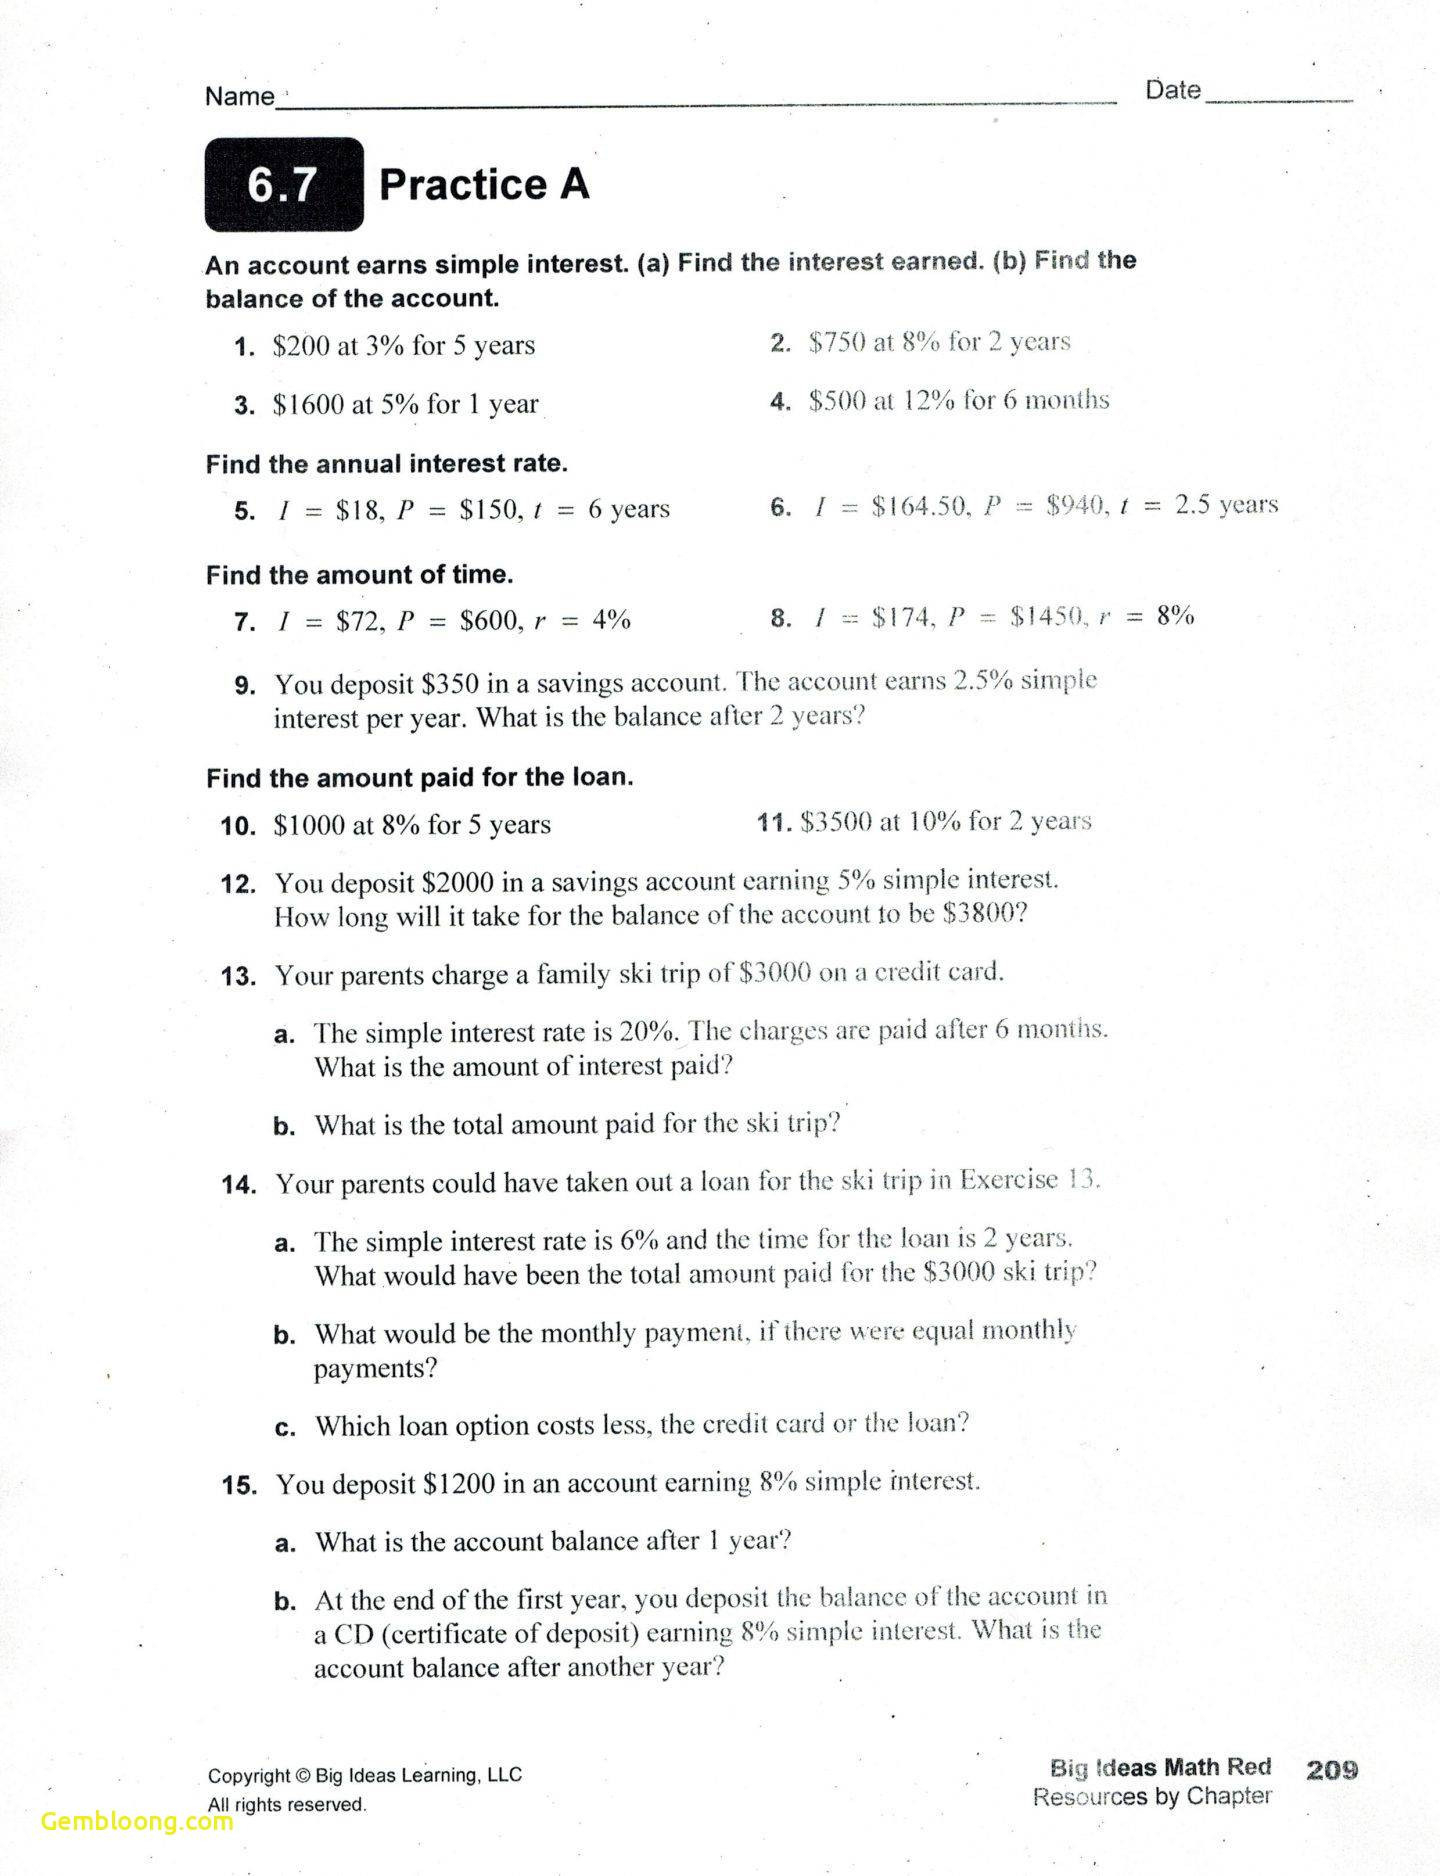 compound-interest-and-e-worksheet-answers-cramerforcongress-db-excel